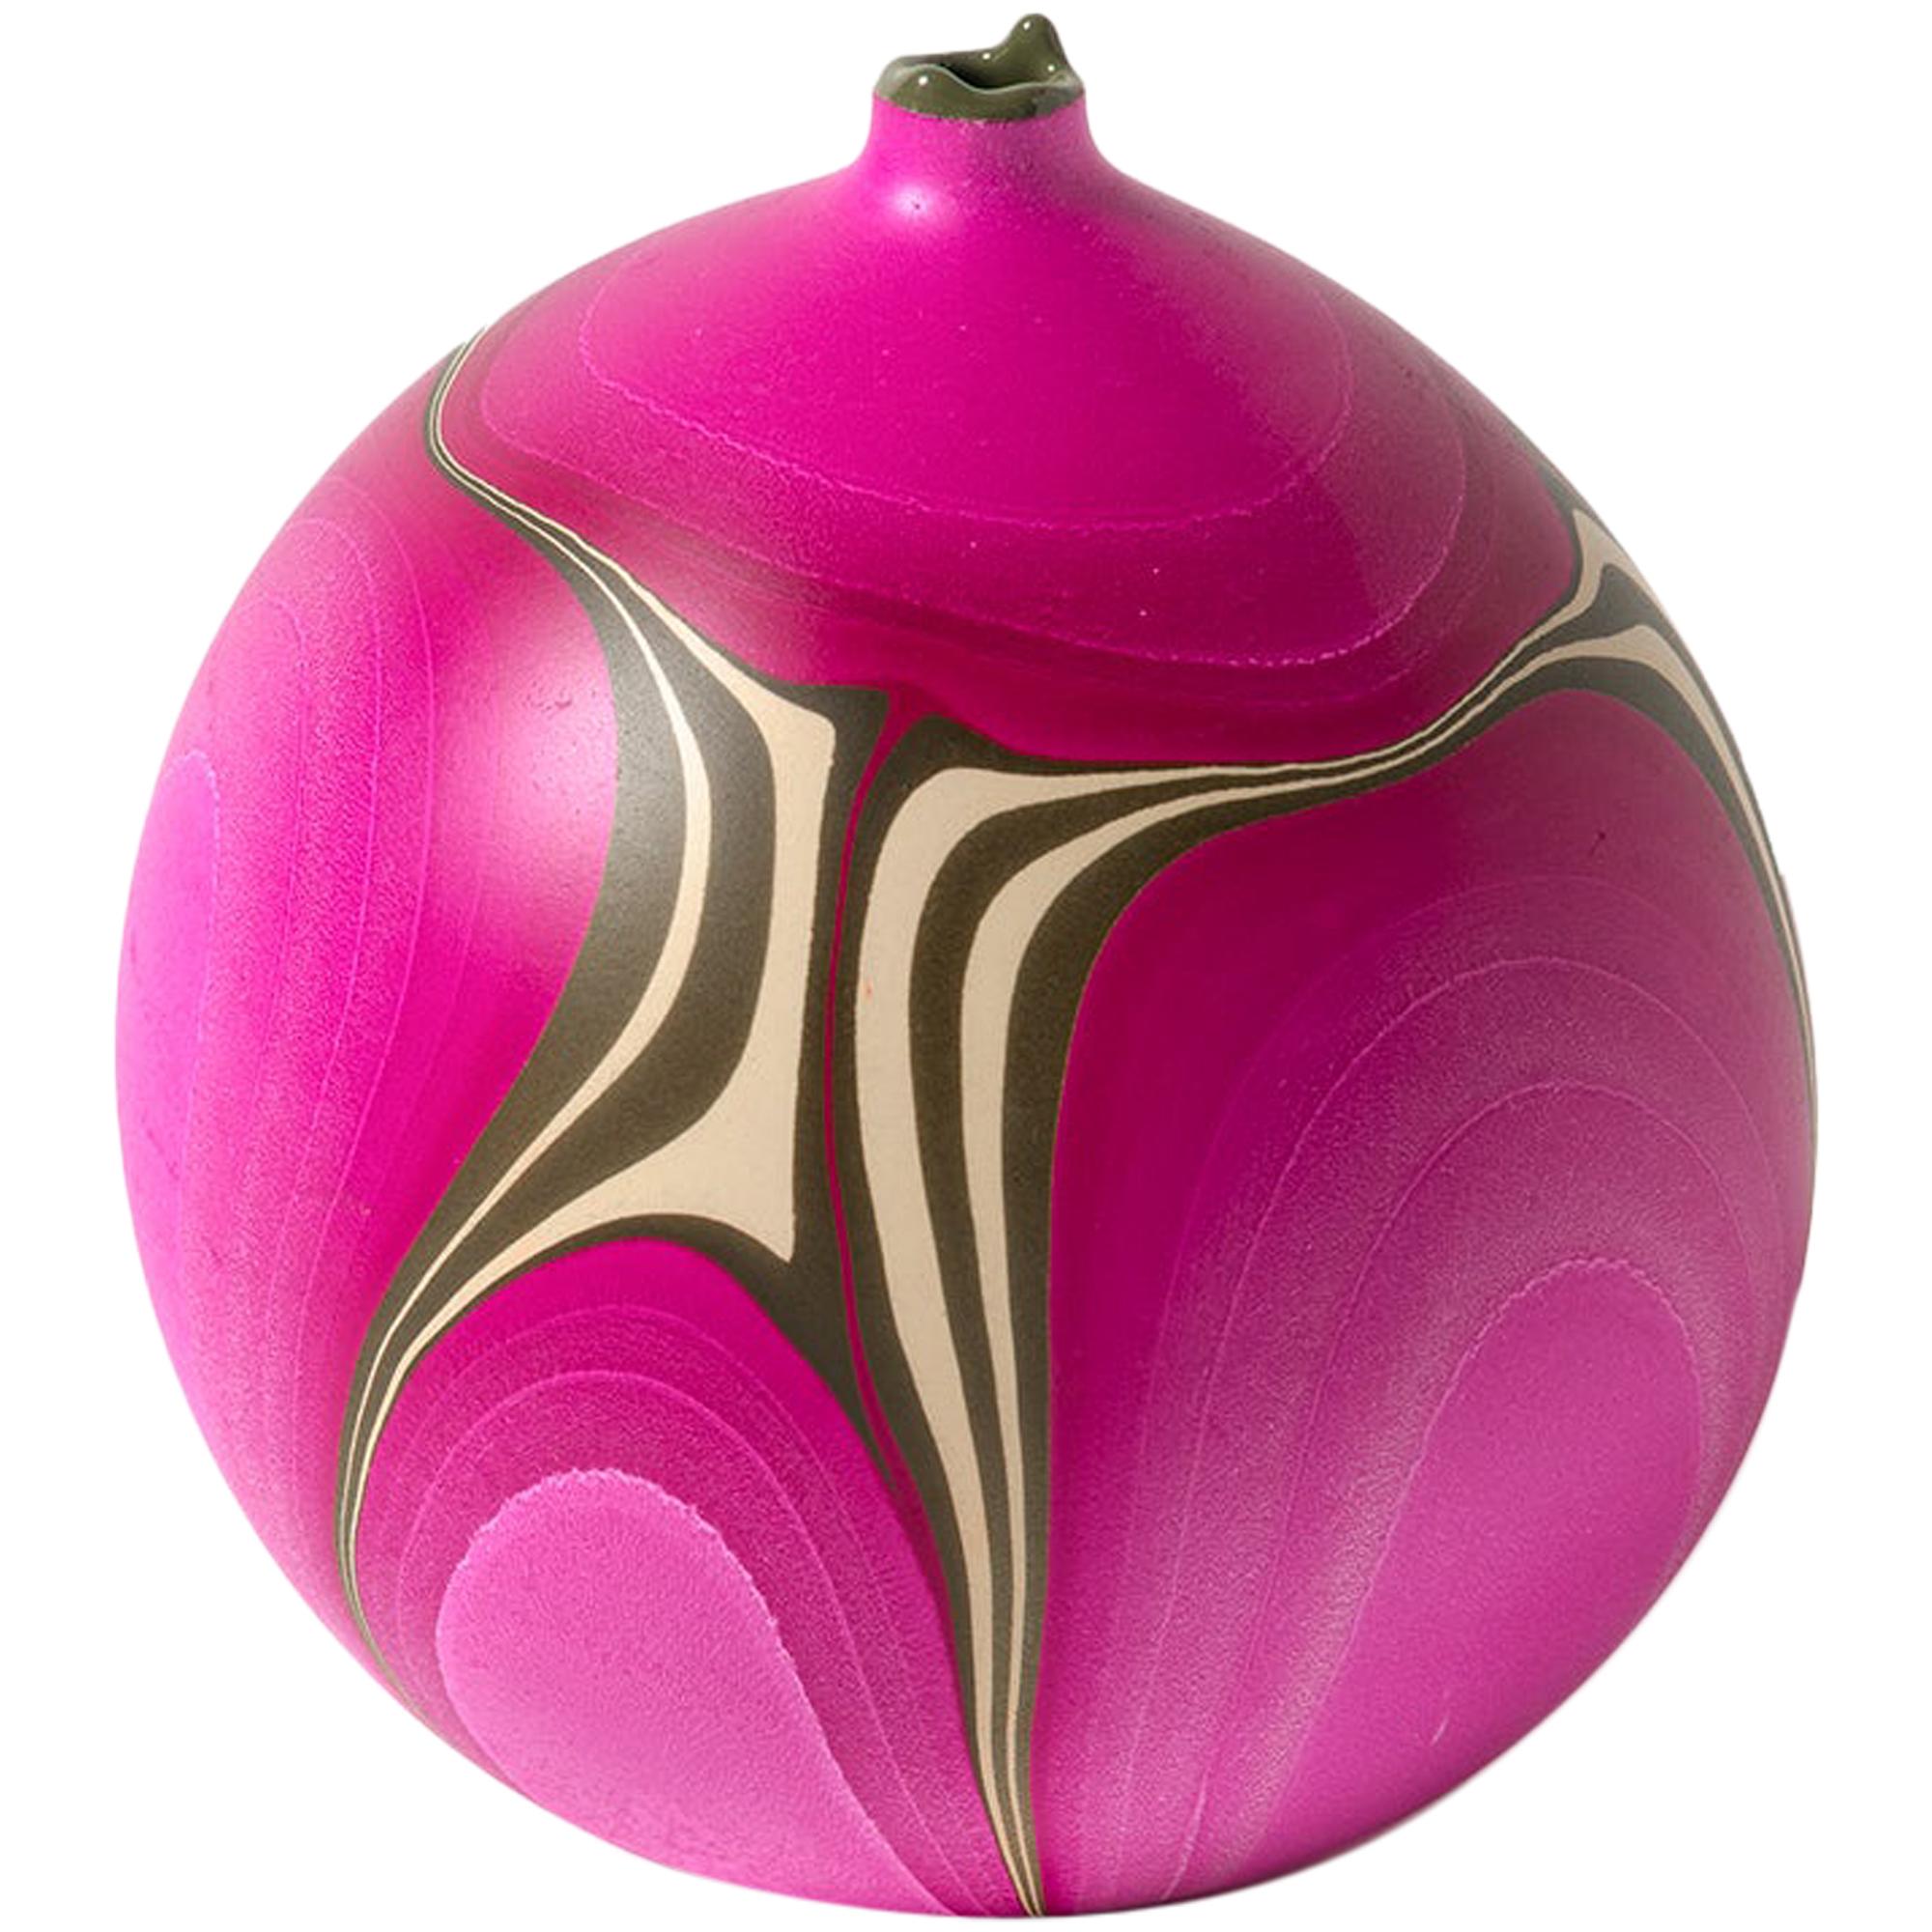 Contemporary Marbled Rio Grande Vase in Fuchsia by Elyse Graham